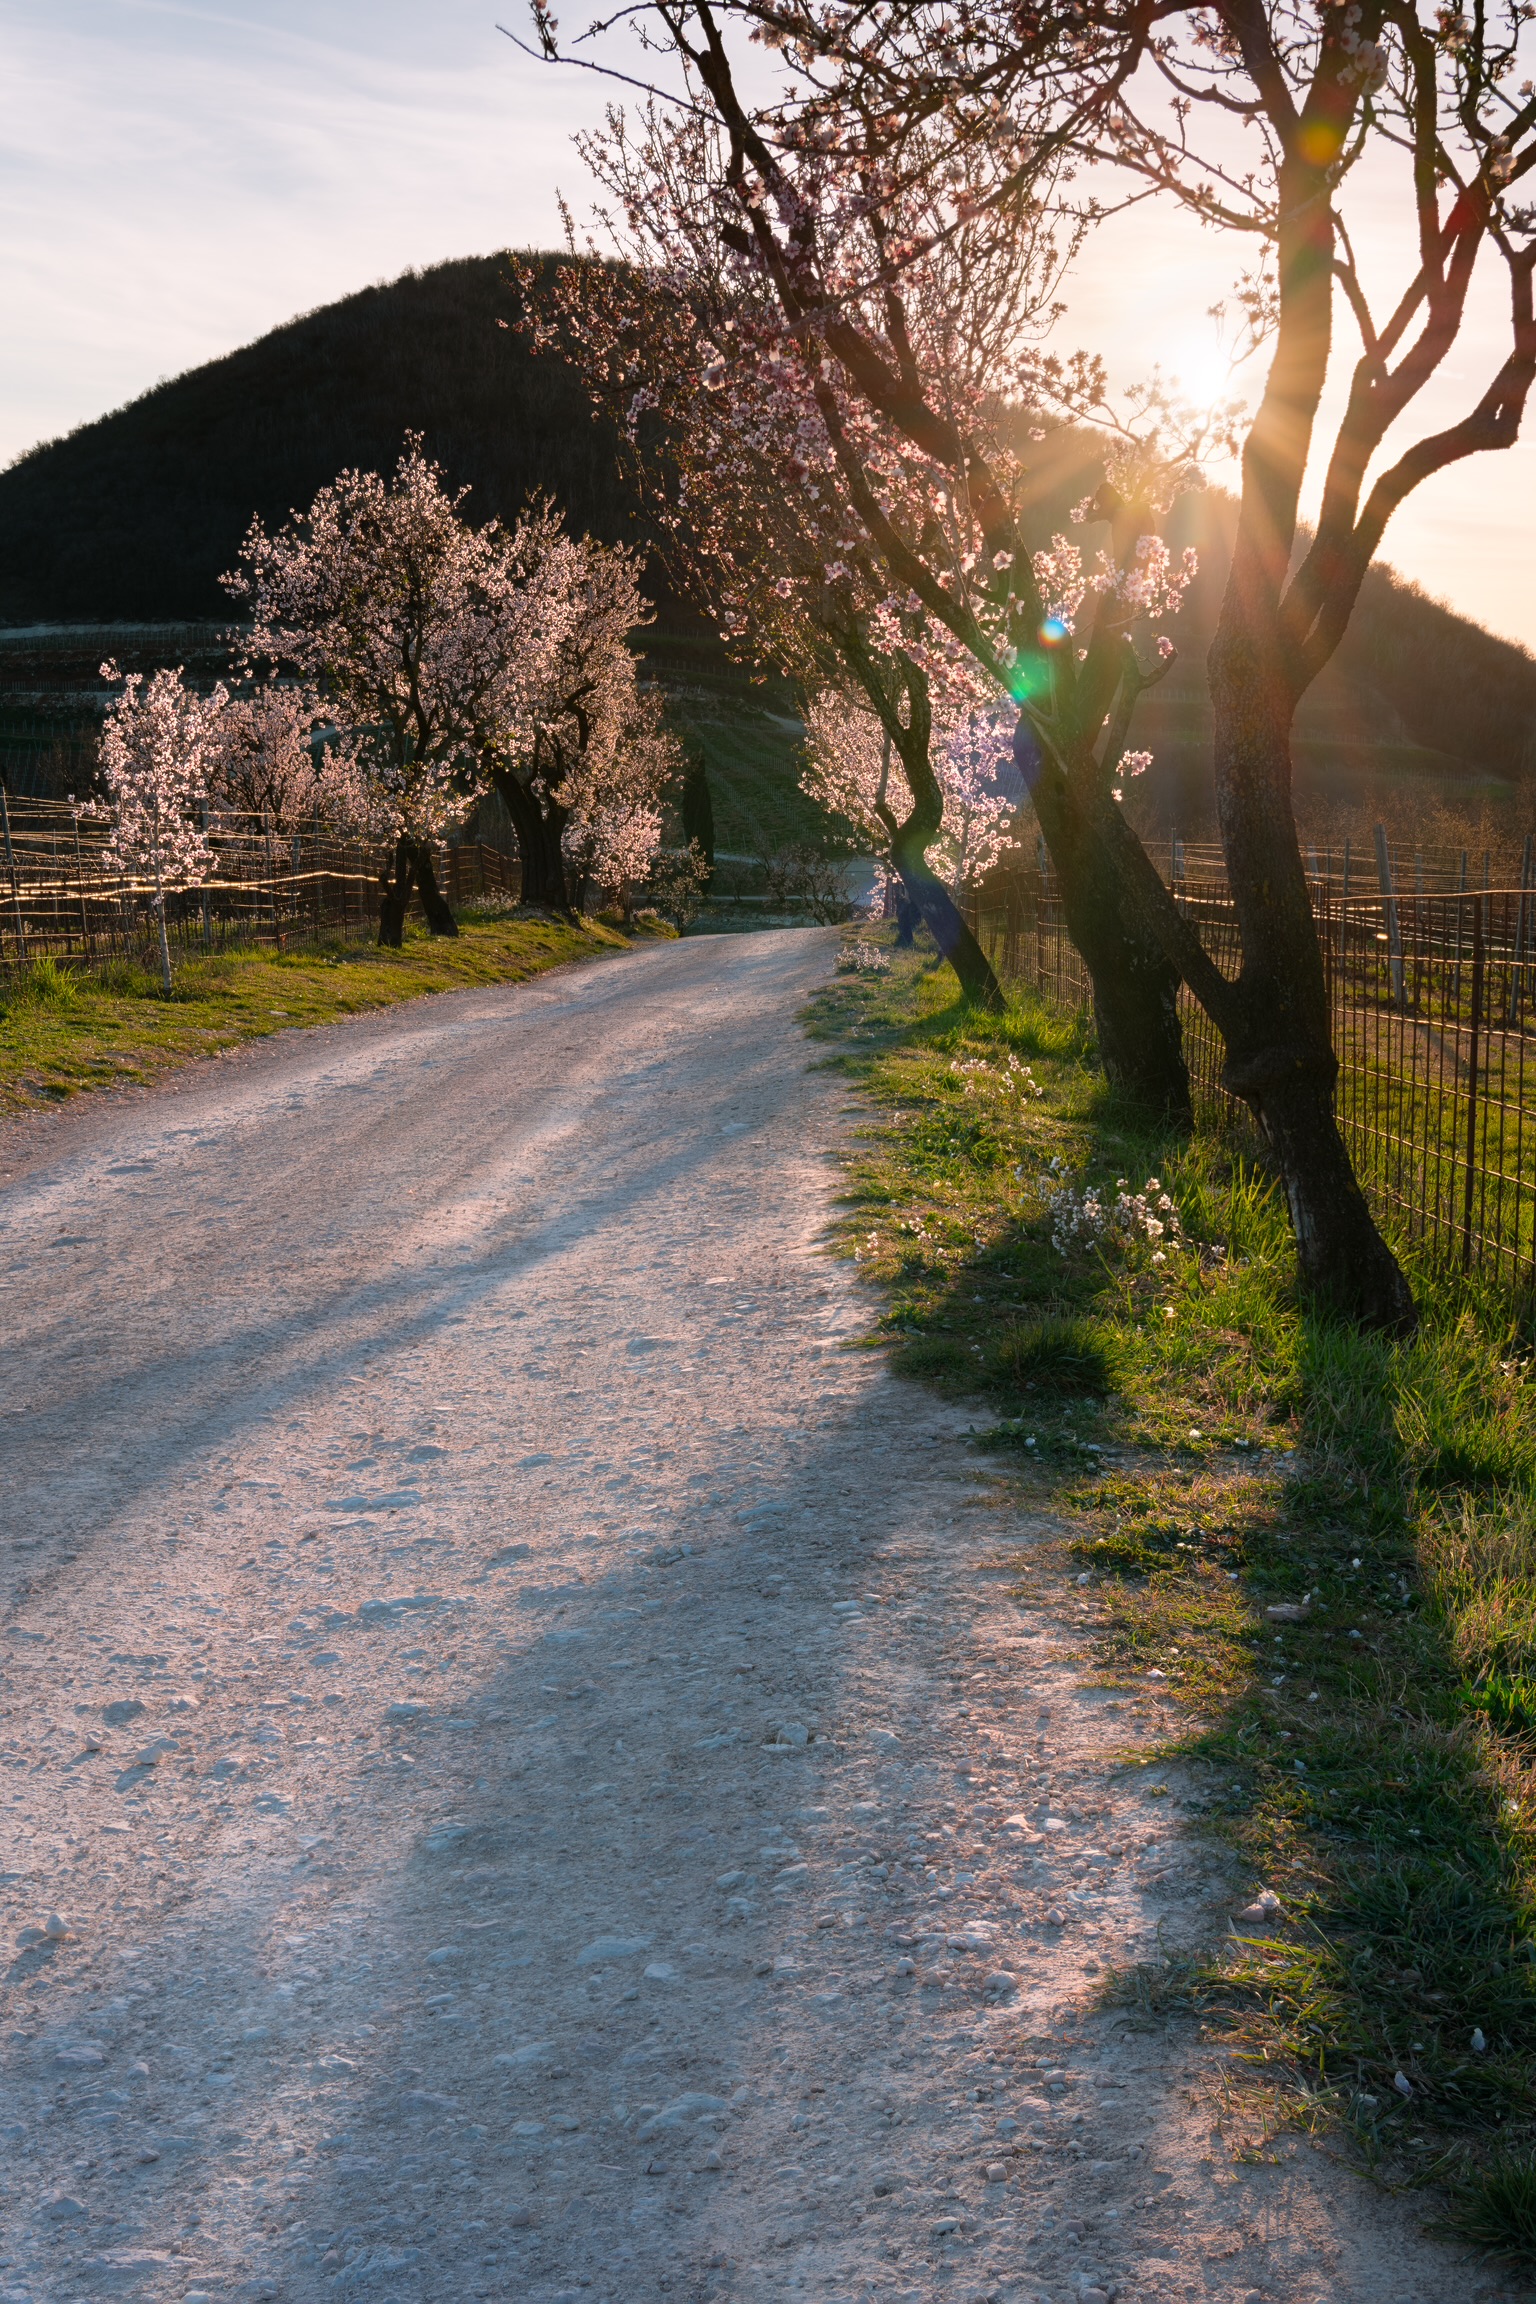 Almond trees in bloom...